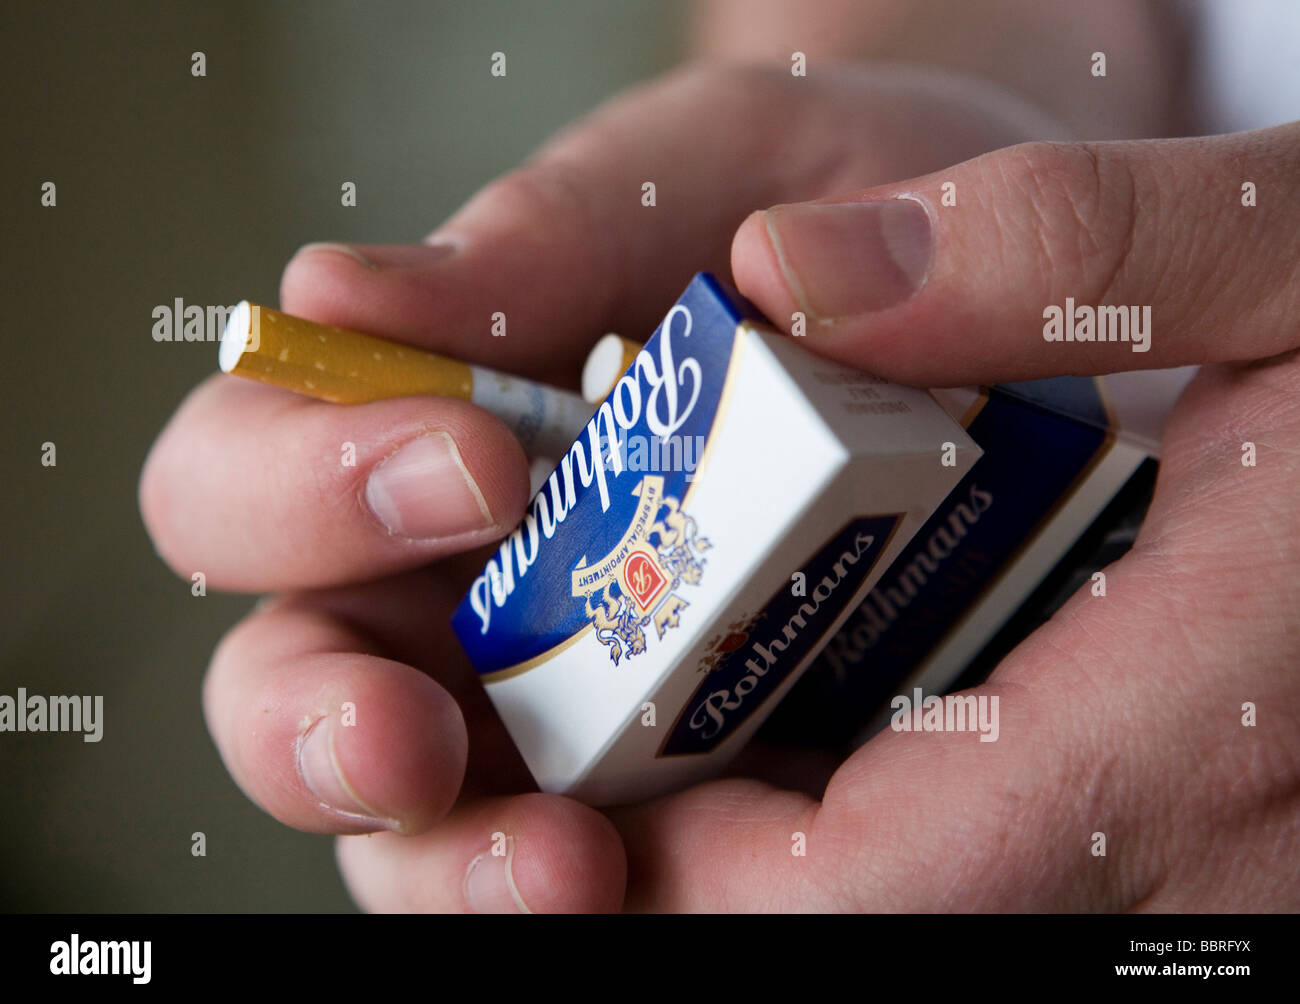 A smoker takes a Rothmans cigarette made by British American Tobacco from a packet Stock Photo